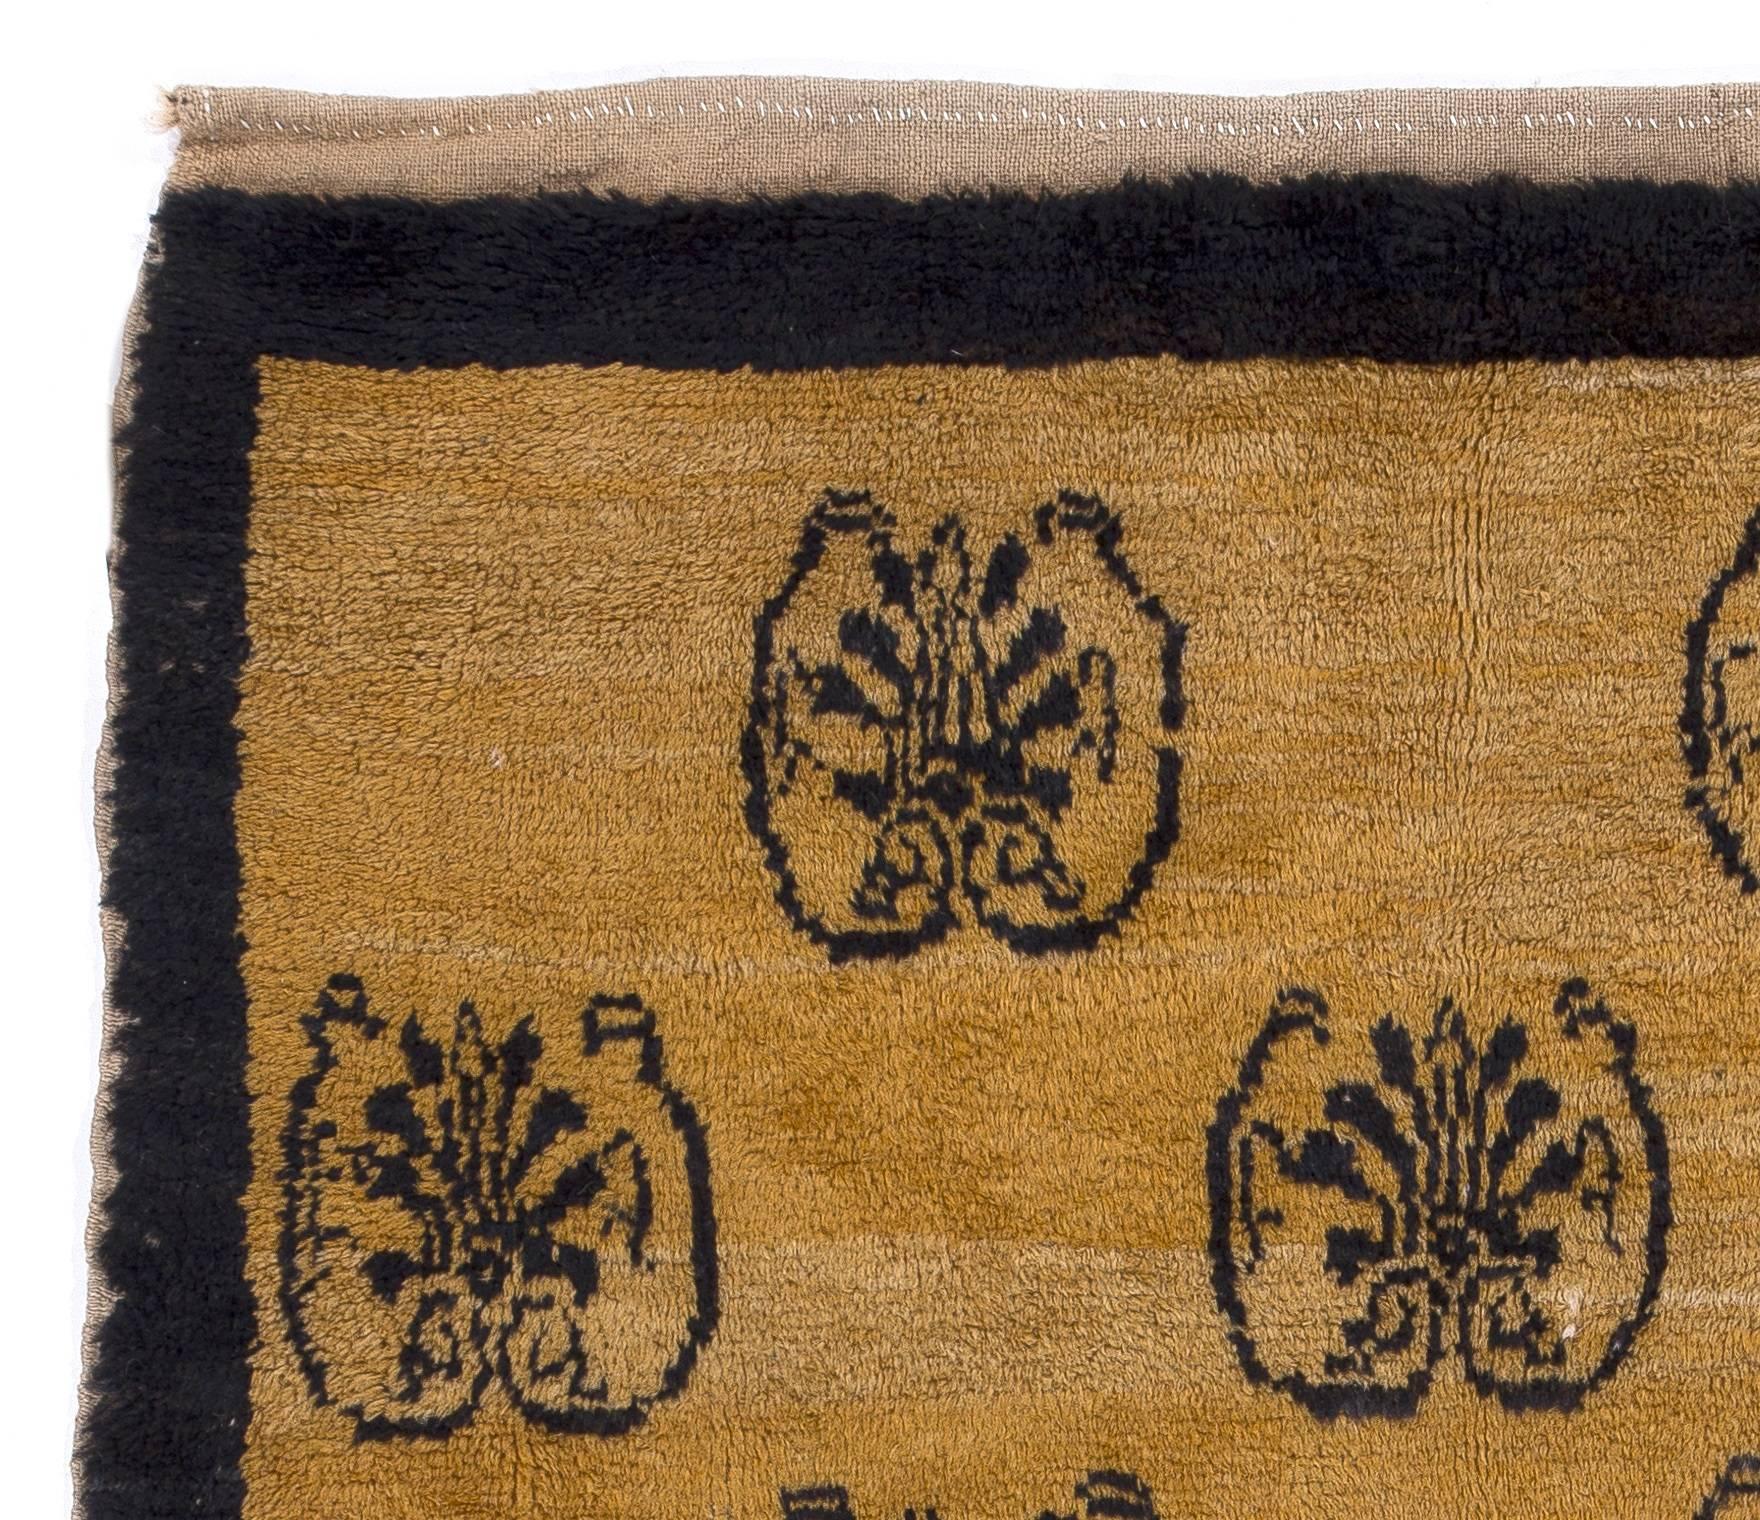 Turkish Unique Hand-Knotted Anatolian Rug with 15 Blue Carnations on Camel Wool Ground